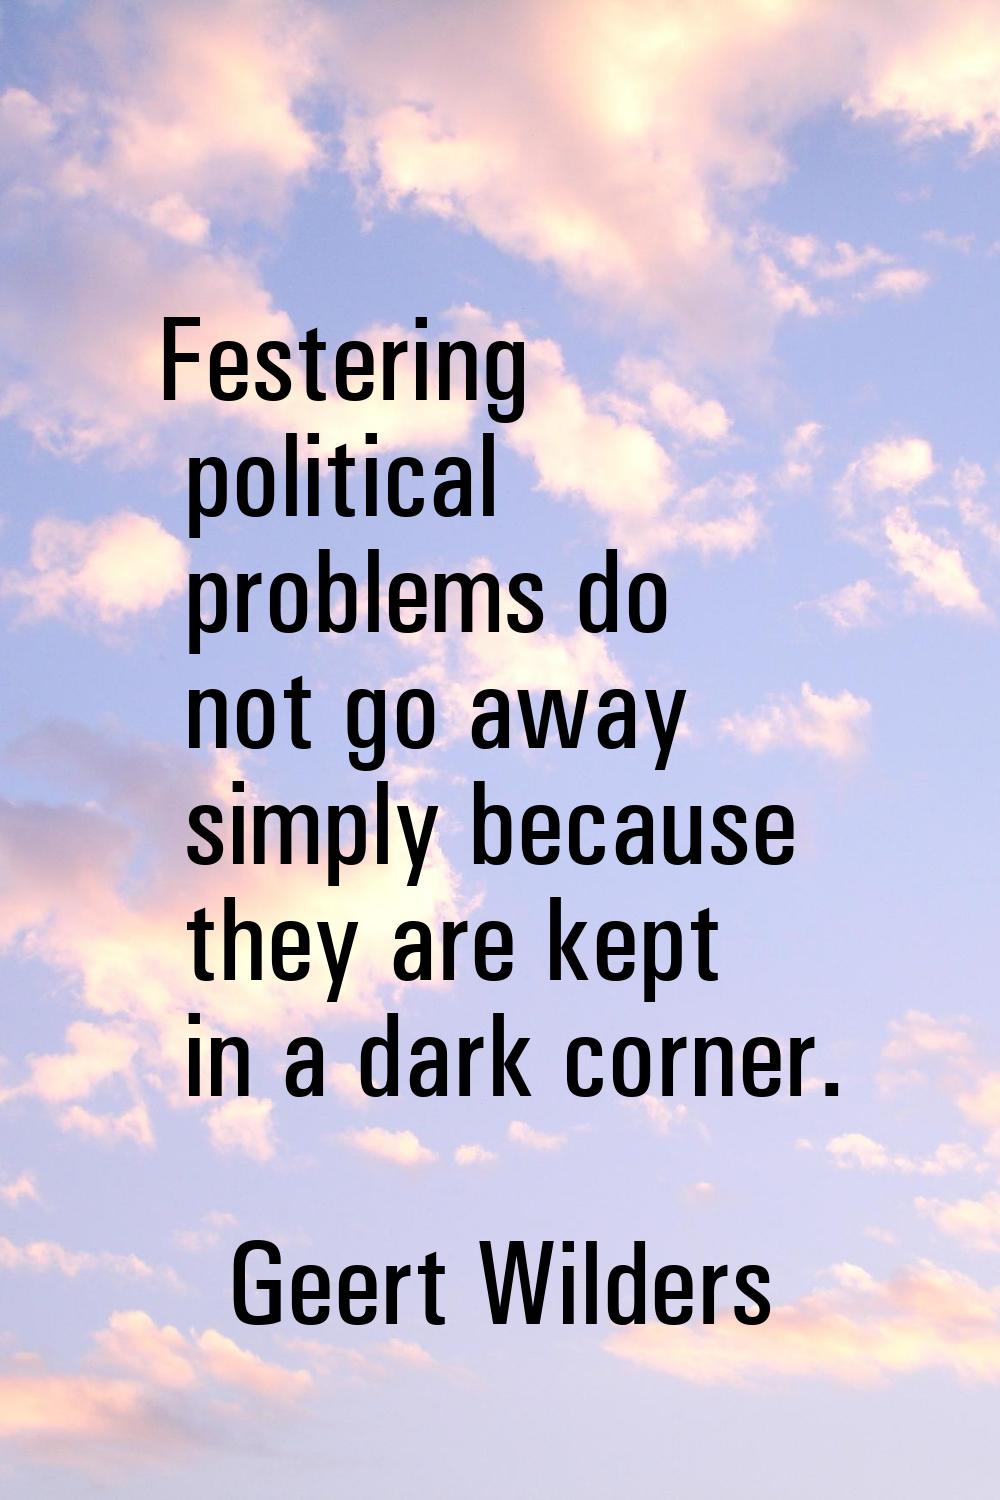 Festering political problems do not go away simply because they are kept in a dark corner.